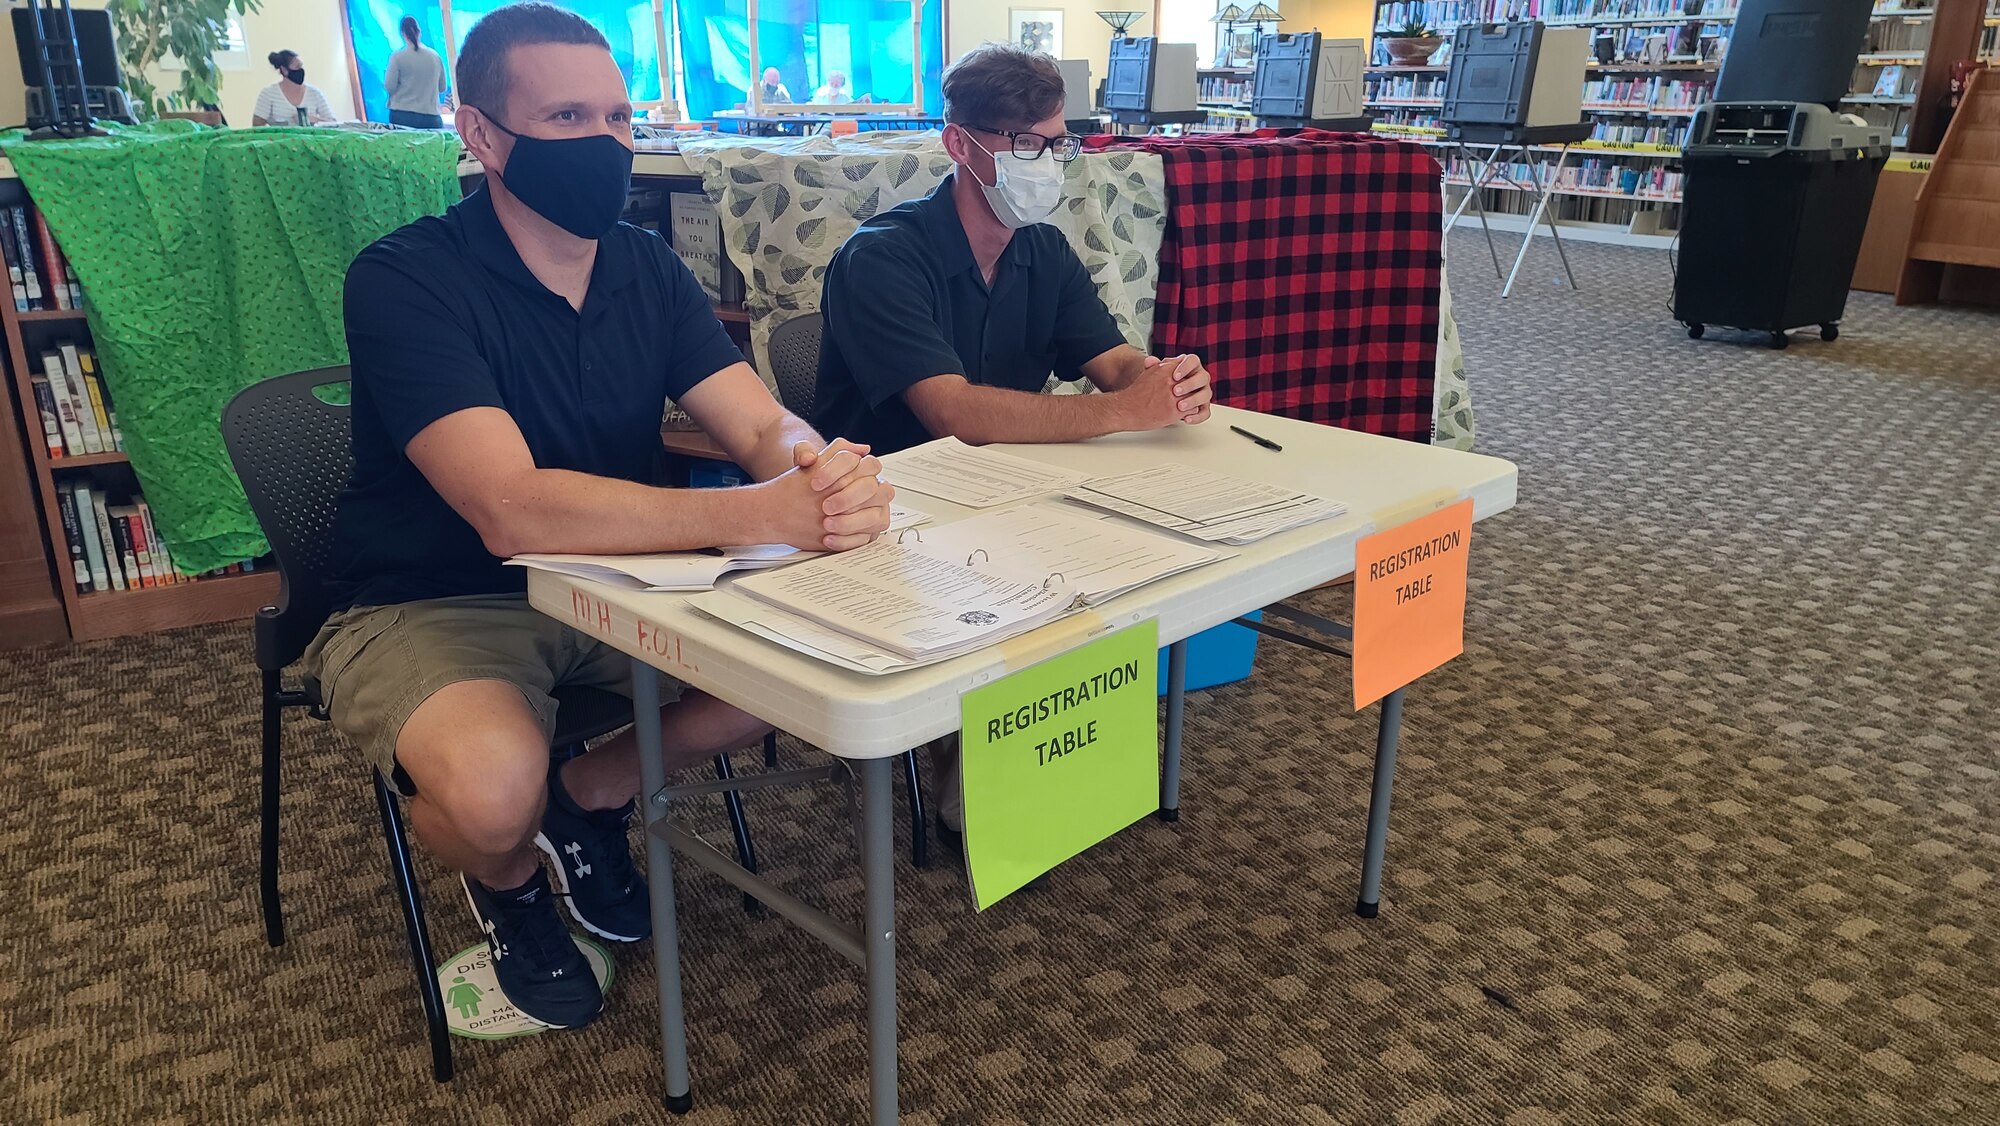 U.S. Air Force Capt. Matthew Shaw, an environmental management officer with the 115th Fighter Wing, and Sgt. Corey Nolden, an infantryman assigned to the 1st Battalion, 128th Infantry staff a voter registration desk at the Mount Horeb Public Library during the Aug. 11 election in Mount Horeb, Wis. Nearly 700 Citizen Soldiers and Airmen from the Wisconsin National Guard mobilized to serve as poll workers across 40 Wisconsin counties. (U.S. Air National Guard photo by Senior Master Sgt. Larkin Wilde)